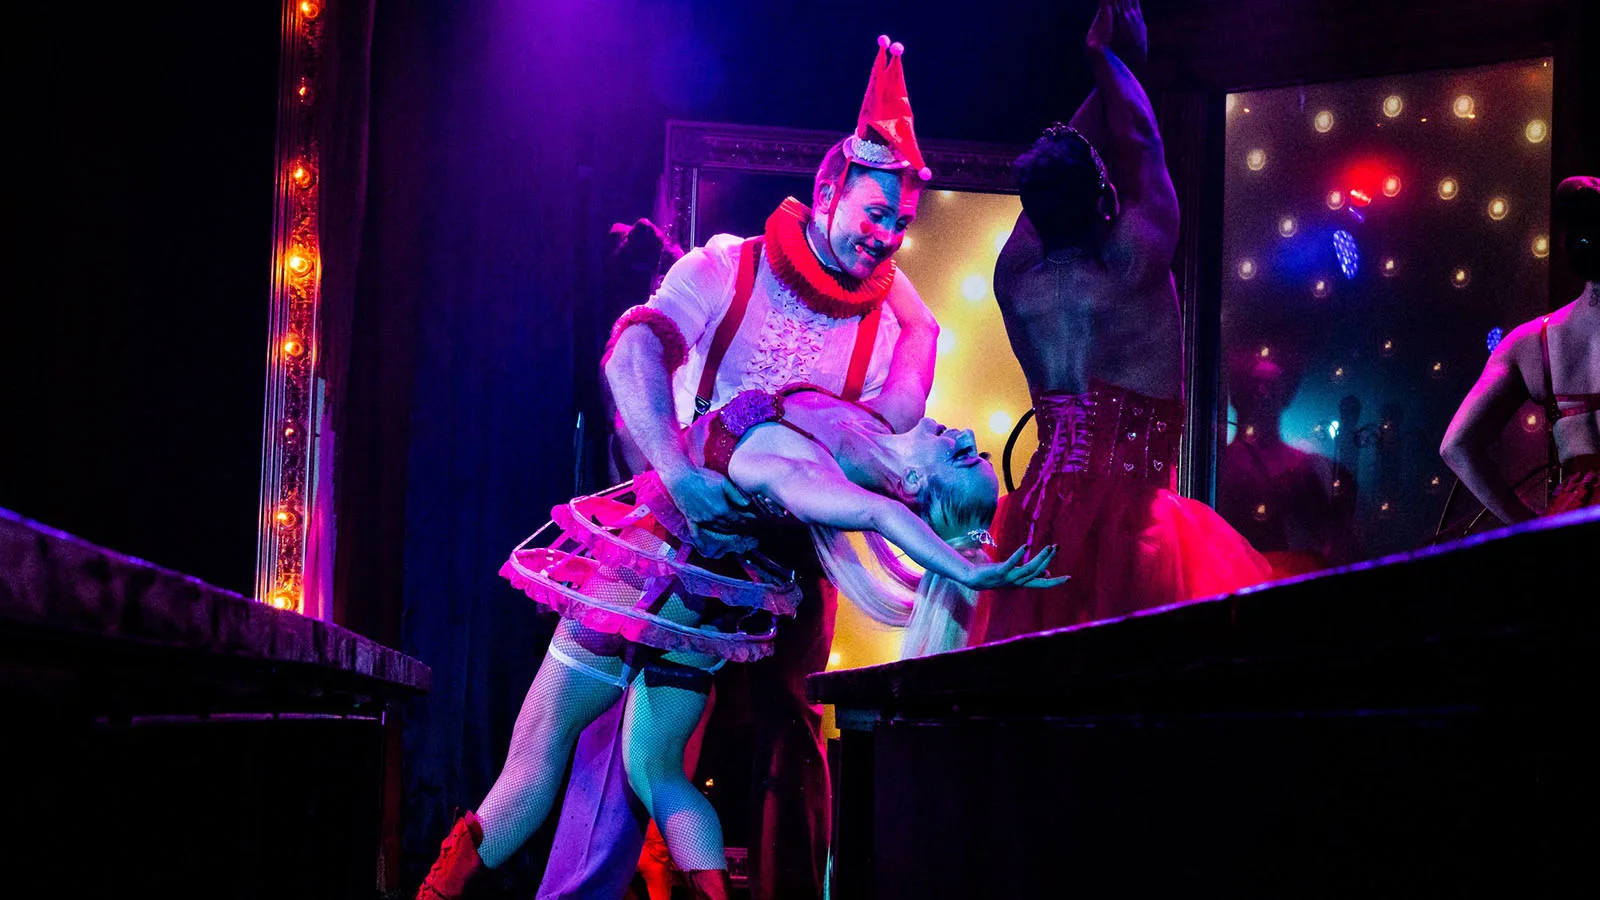 A man dips a women in a colorful and propped-filled stage.